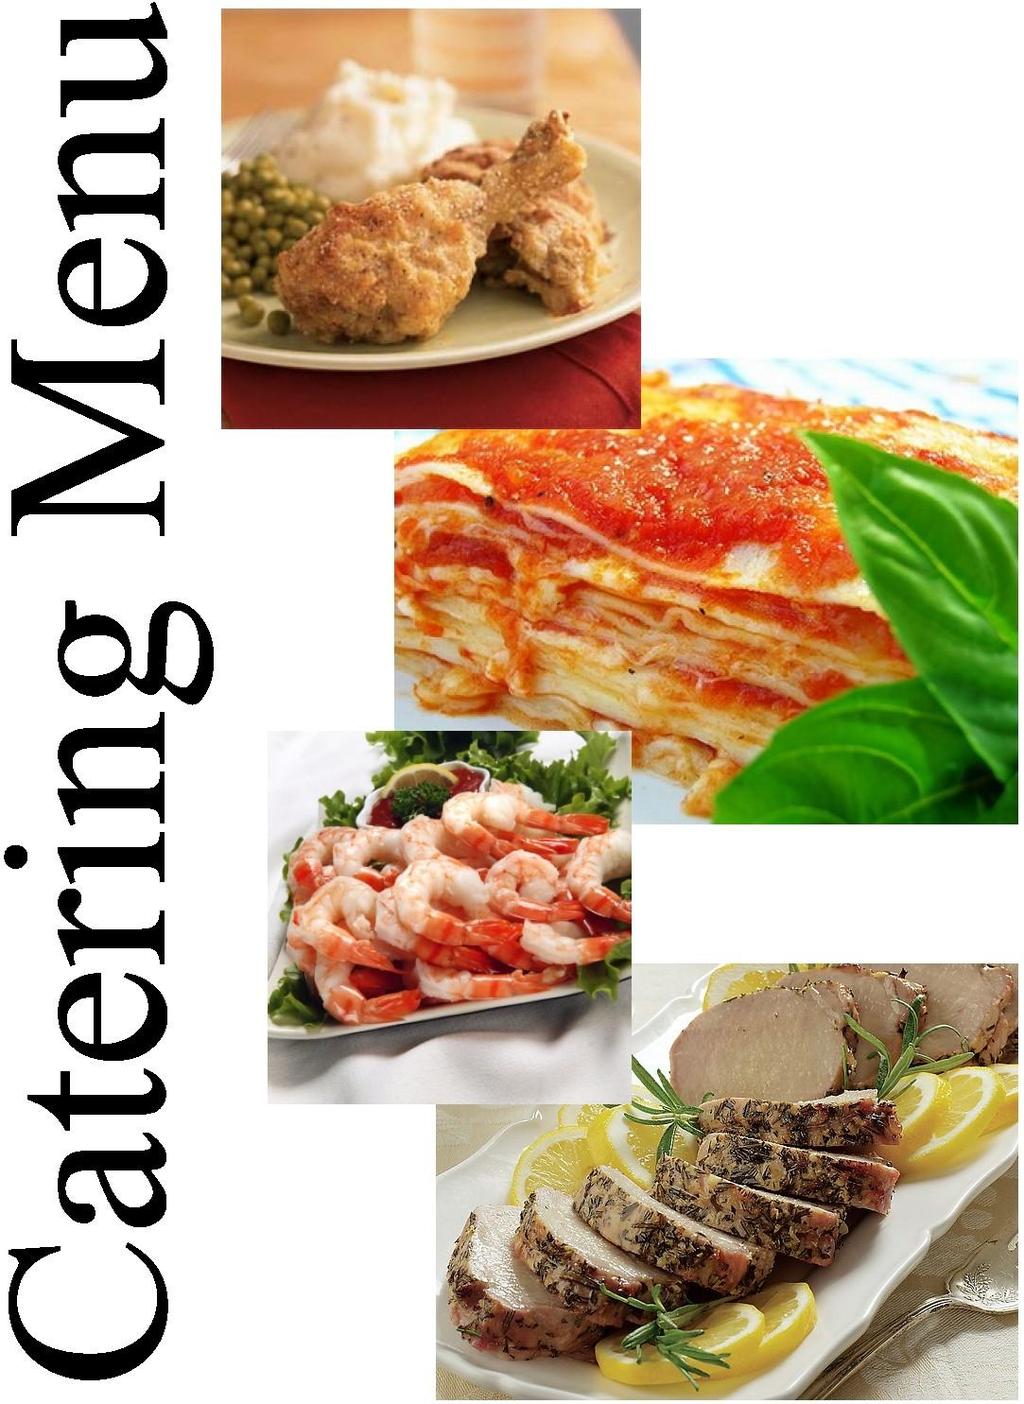 CATERING BY SMG